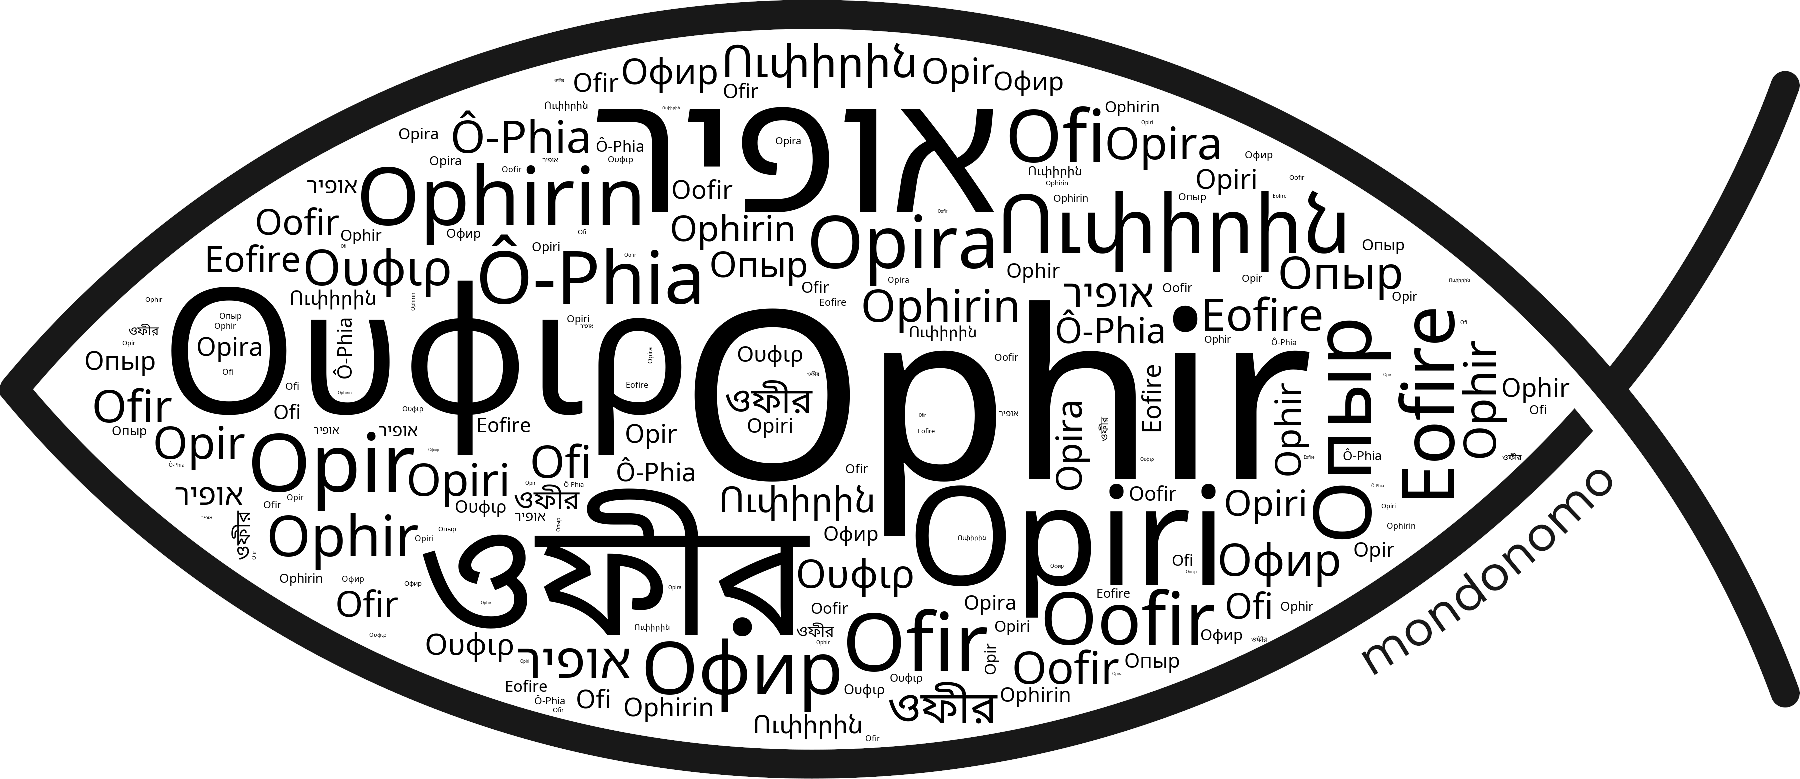 Name Ophir in the world's Bibles